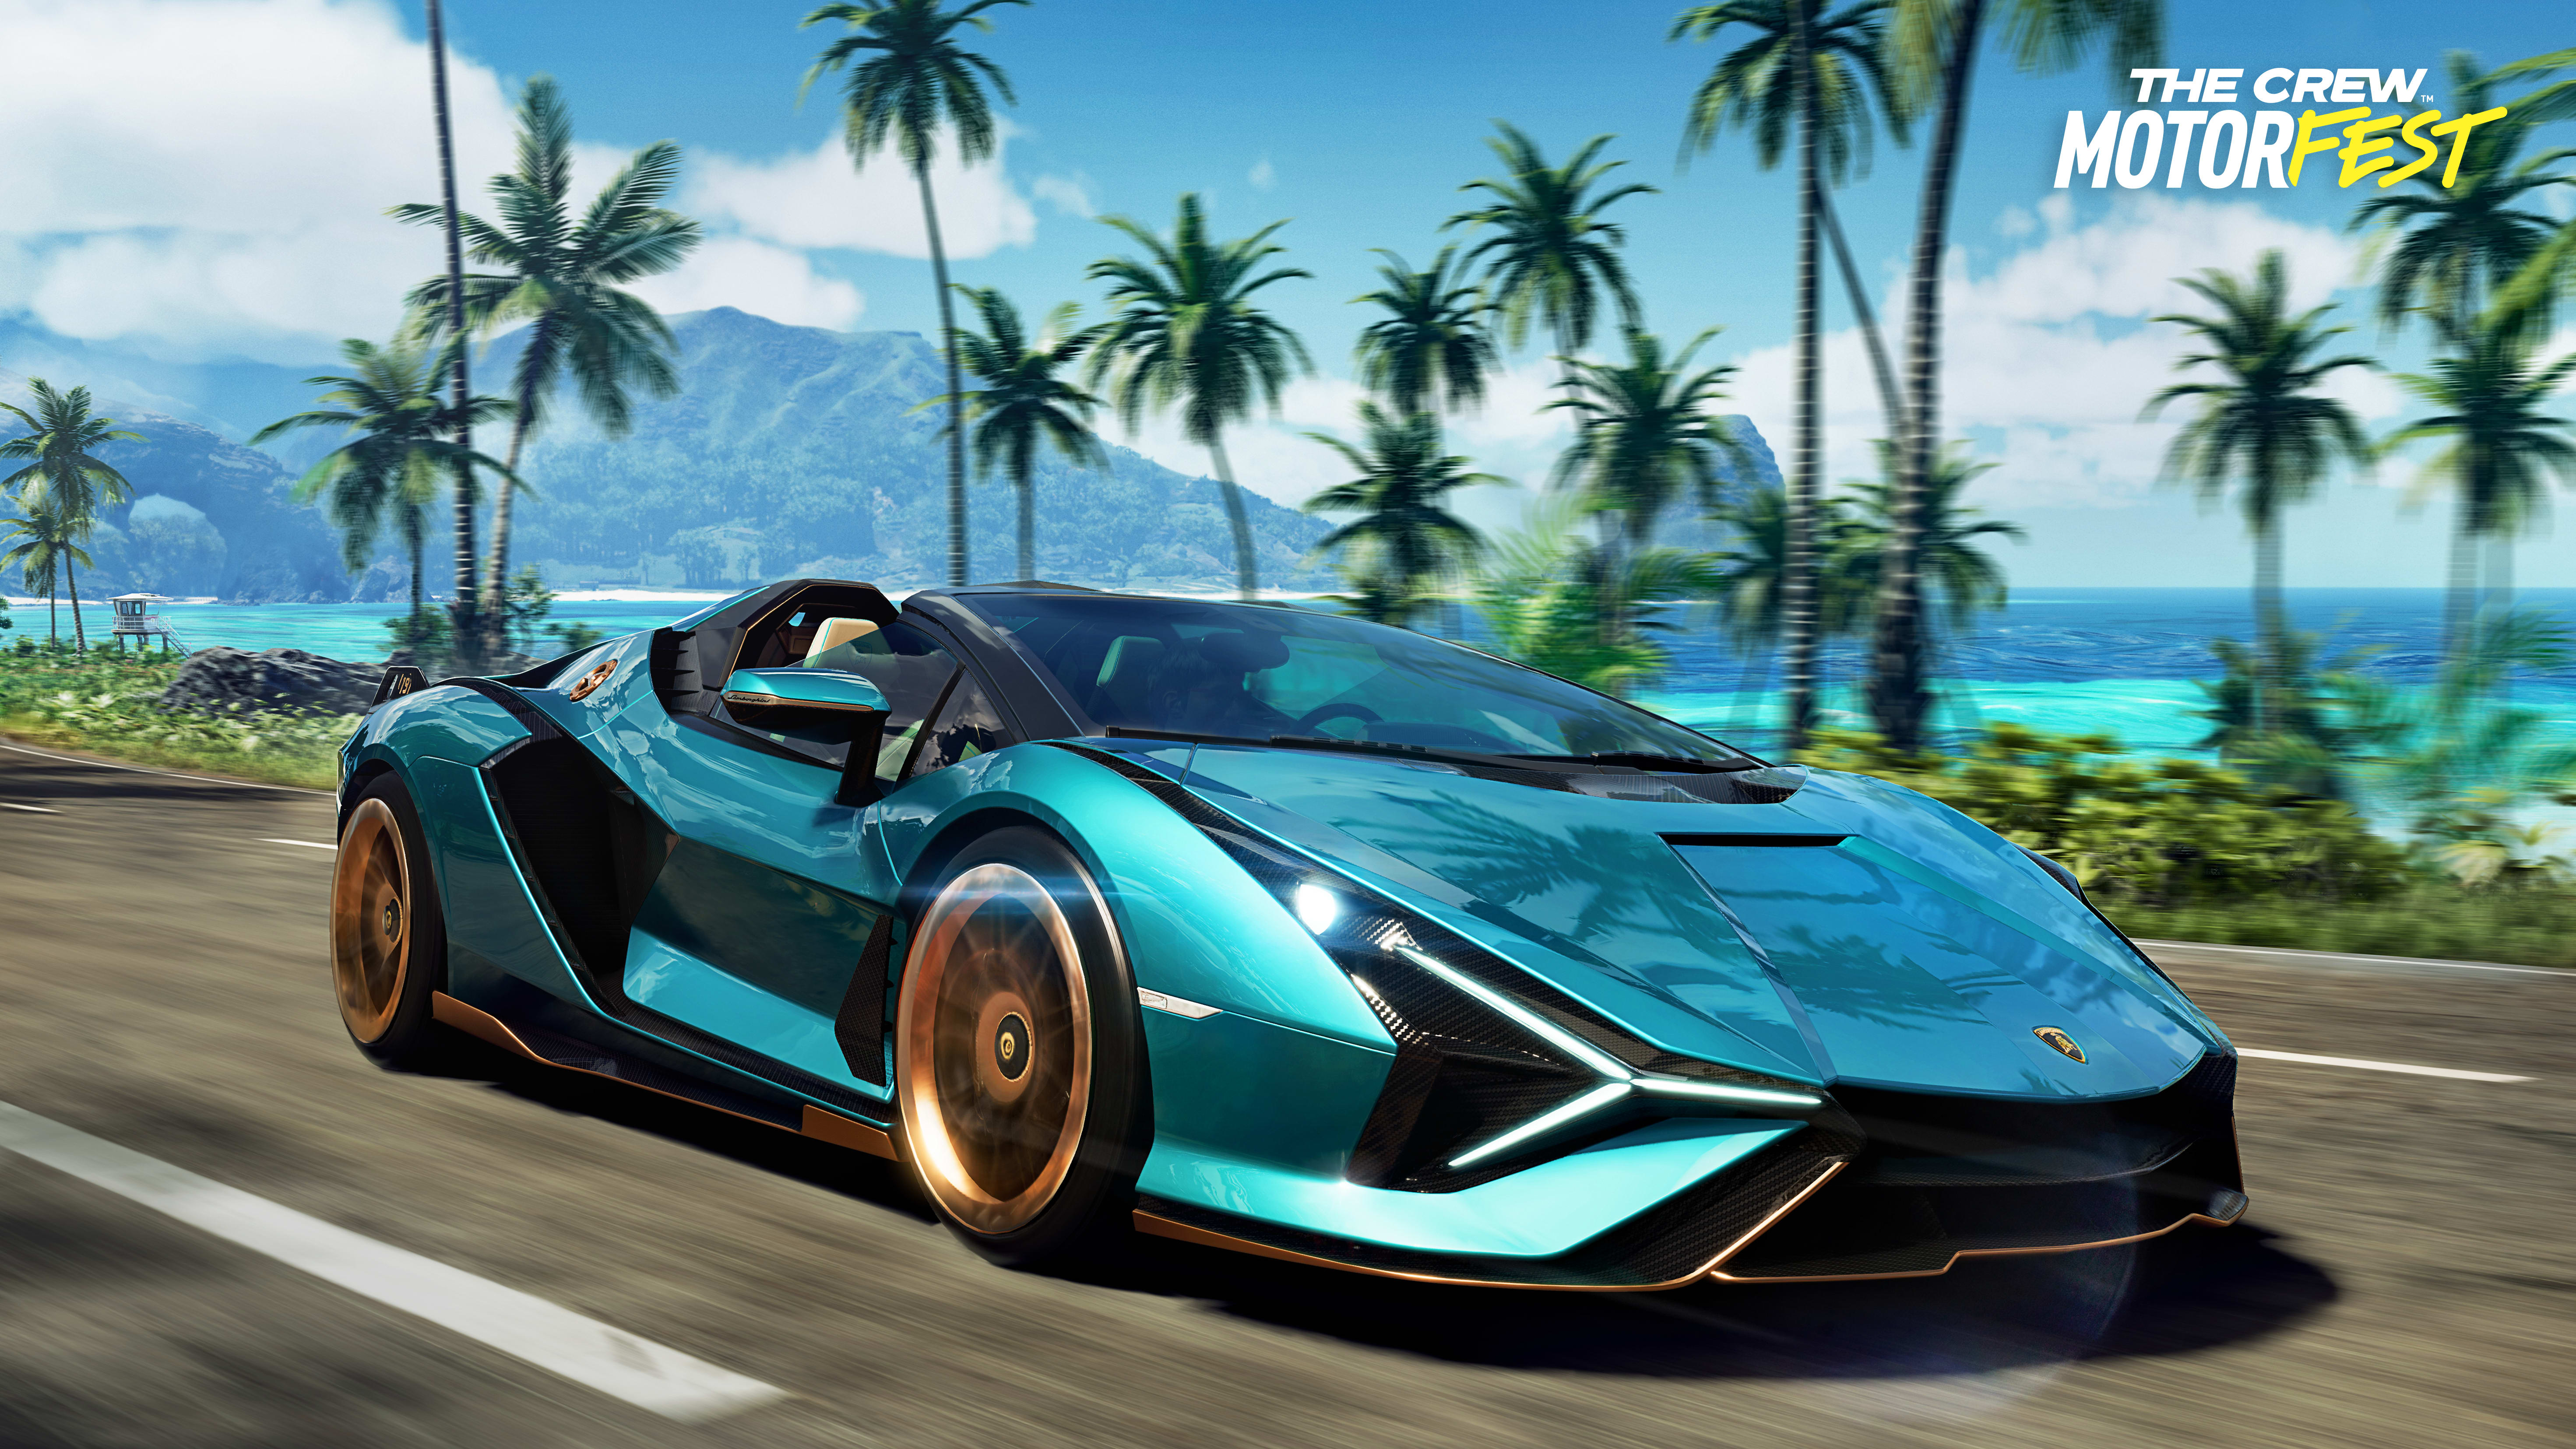 Forza Horizon on X: Japan has managed to reclaim its lead but